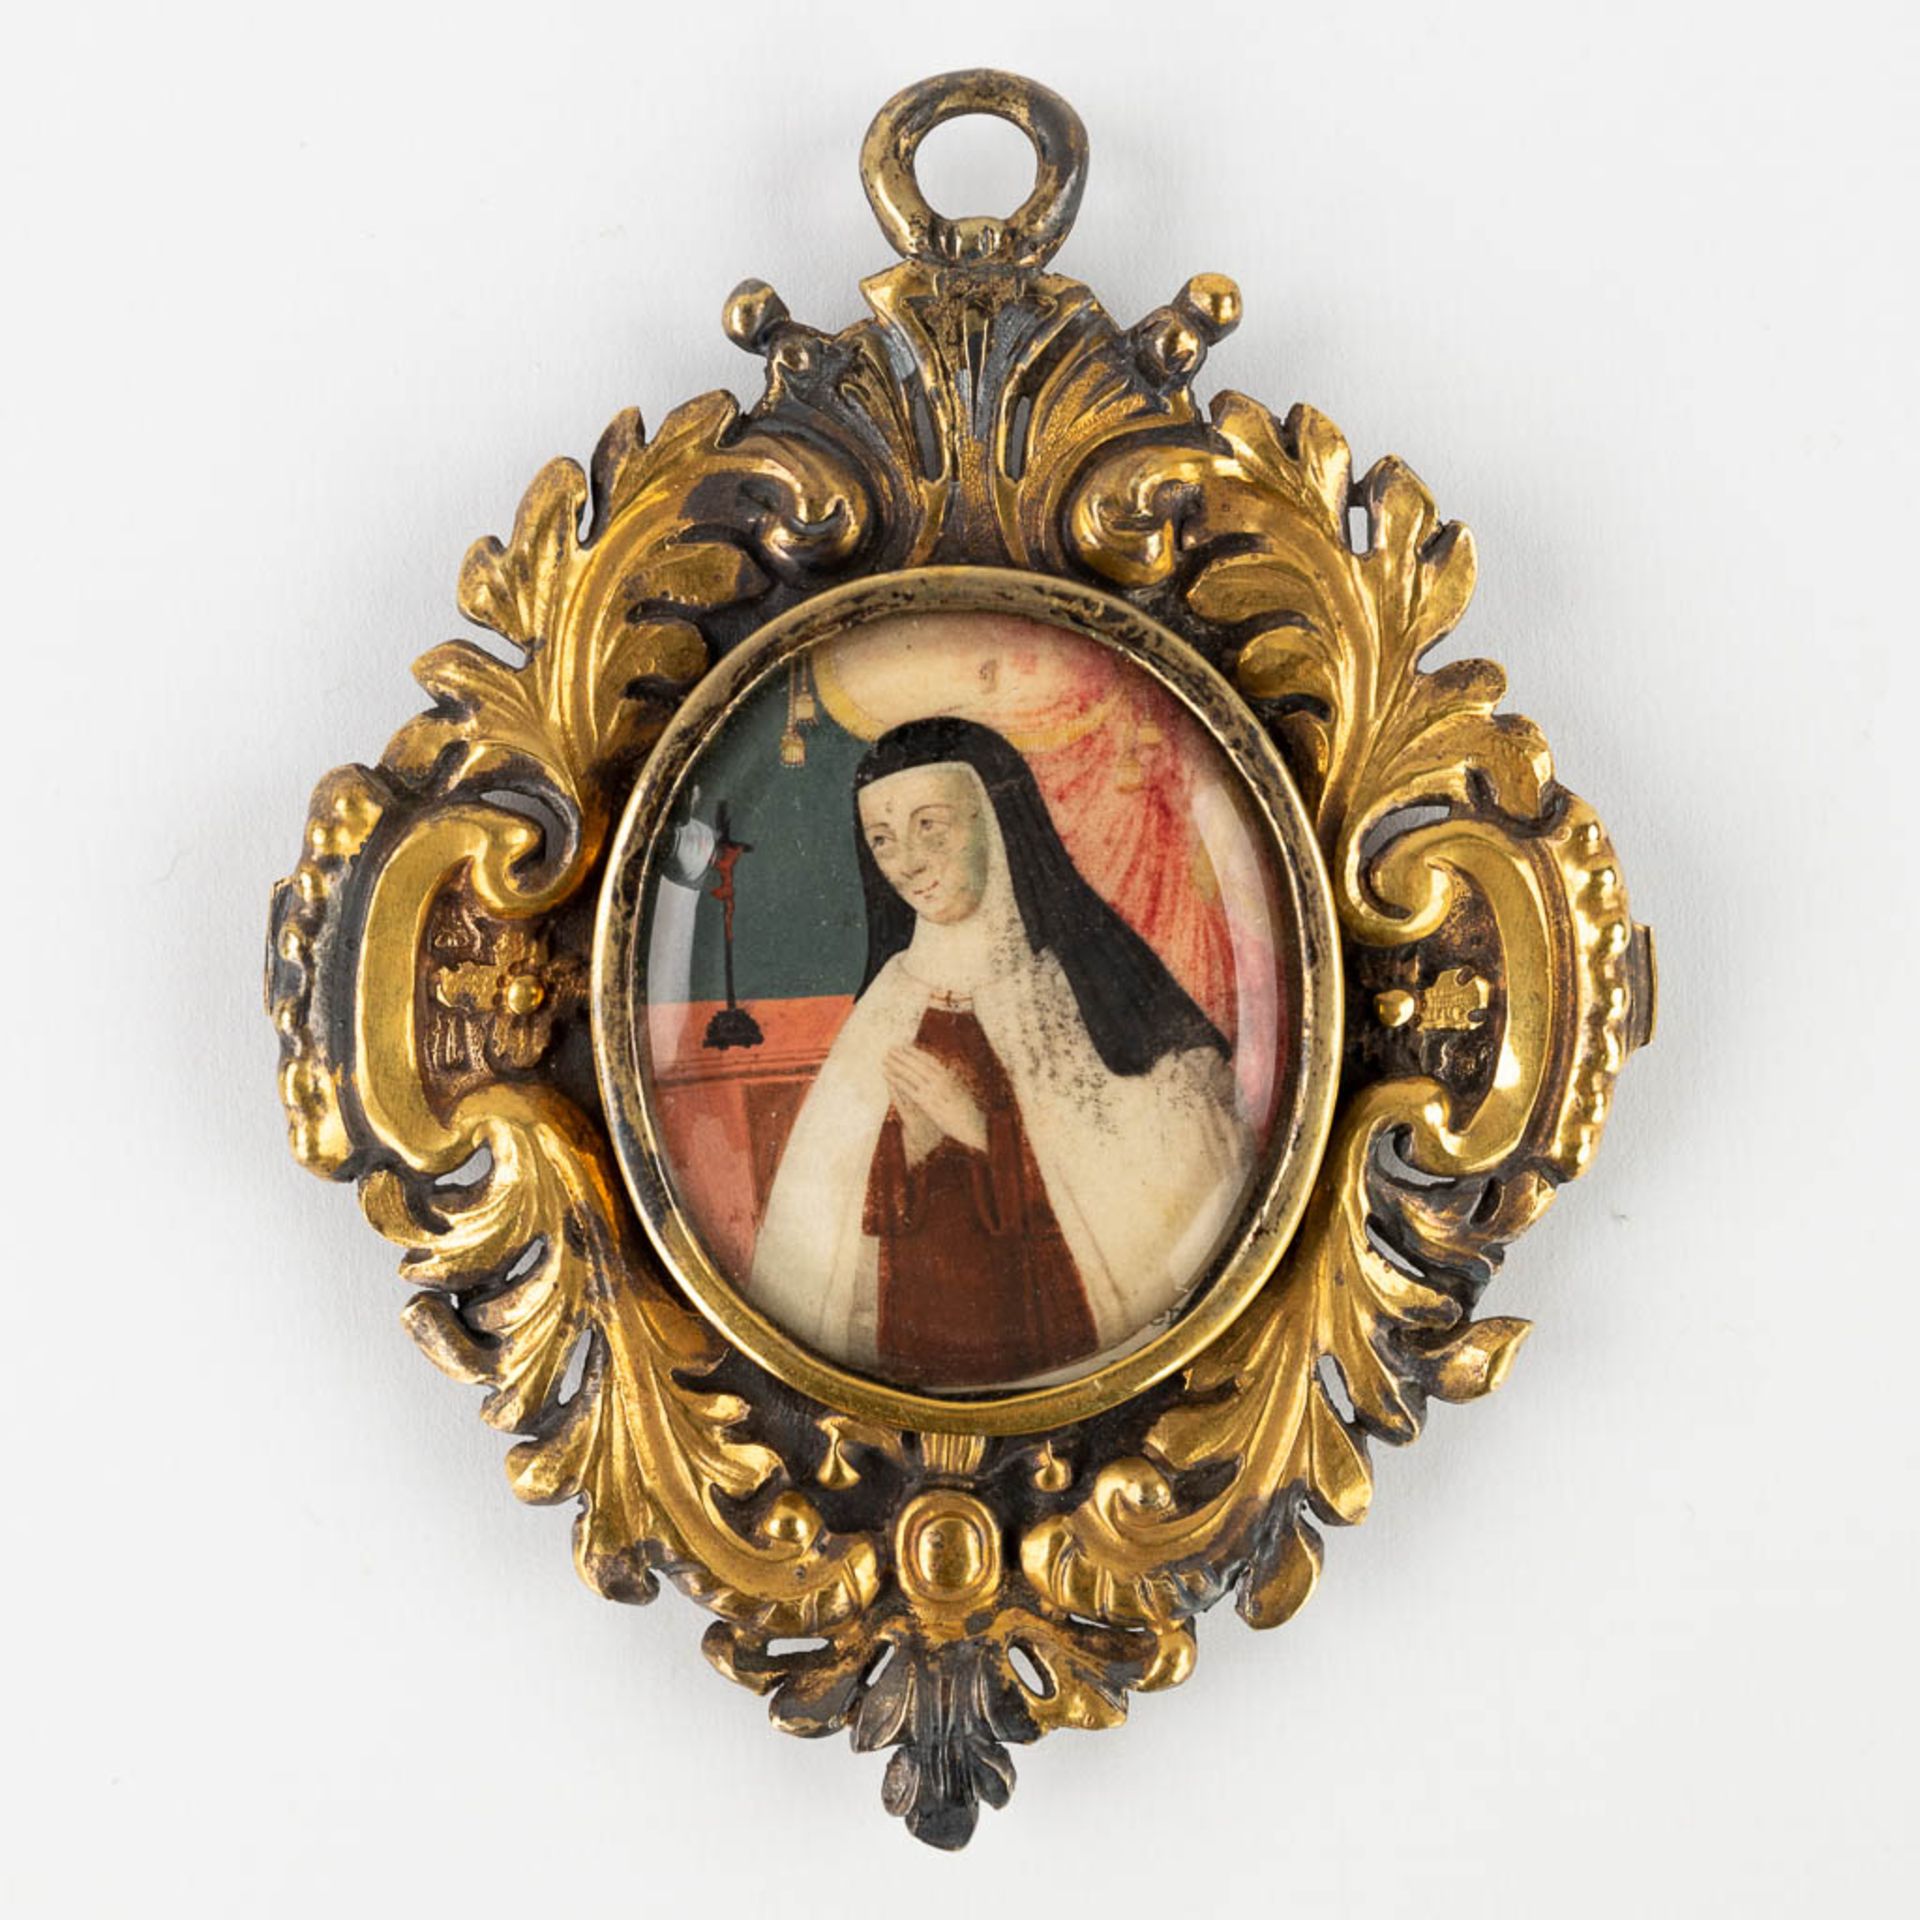 A Theca with a relic, with a miniature painting of Mother Mary on parchment and mounted in a silver